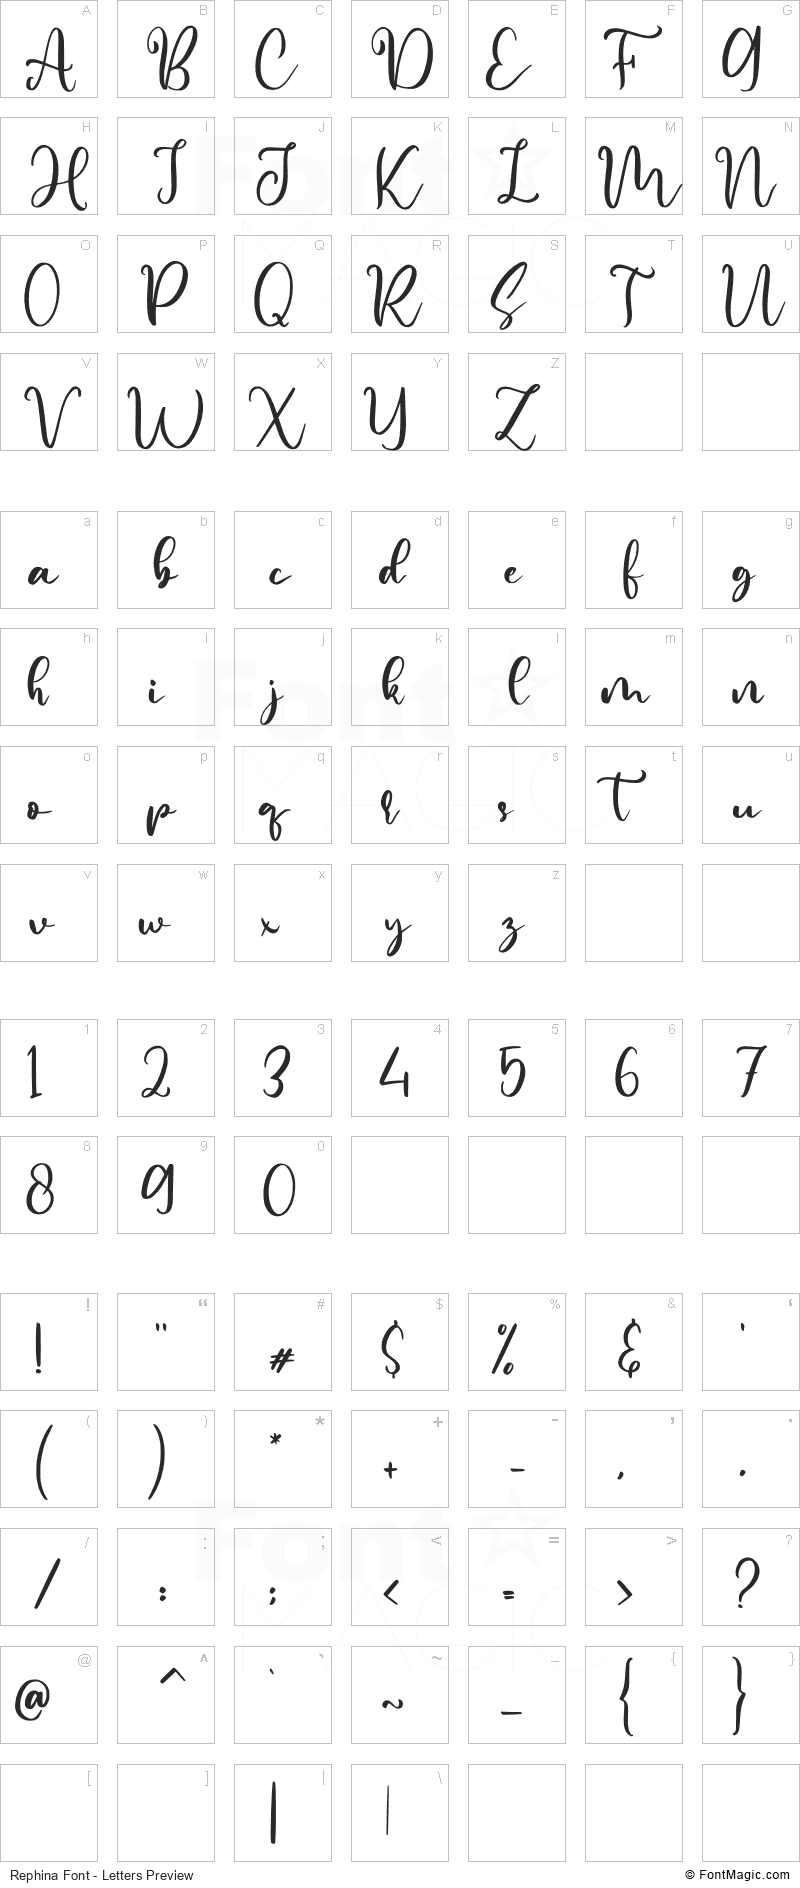 Rephina Font - All Latters Preview Chart